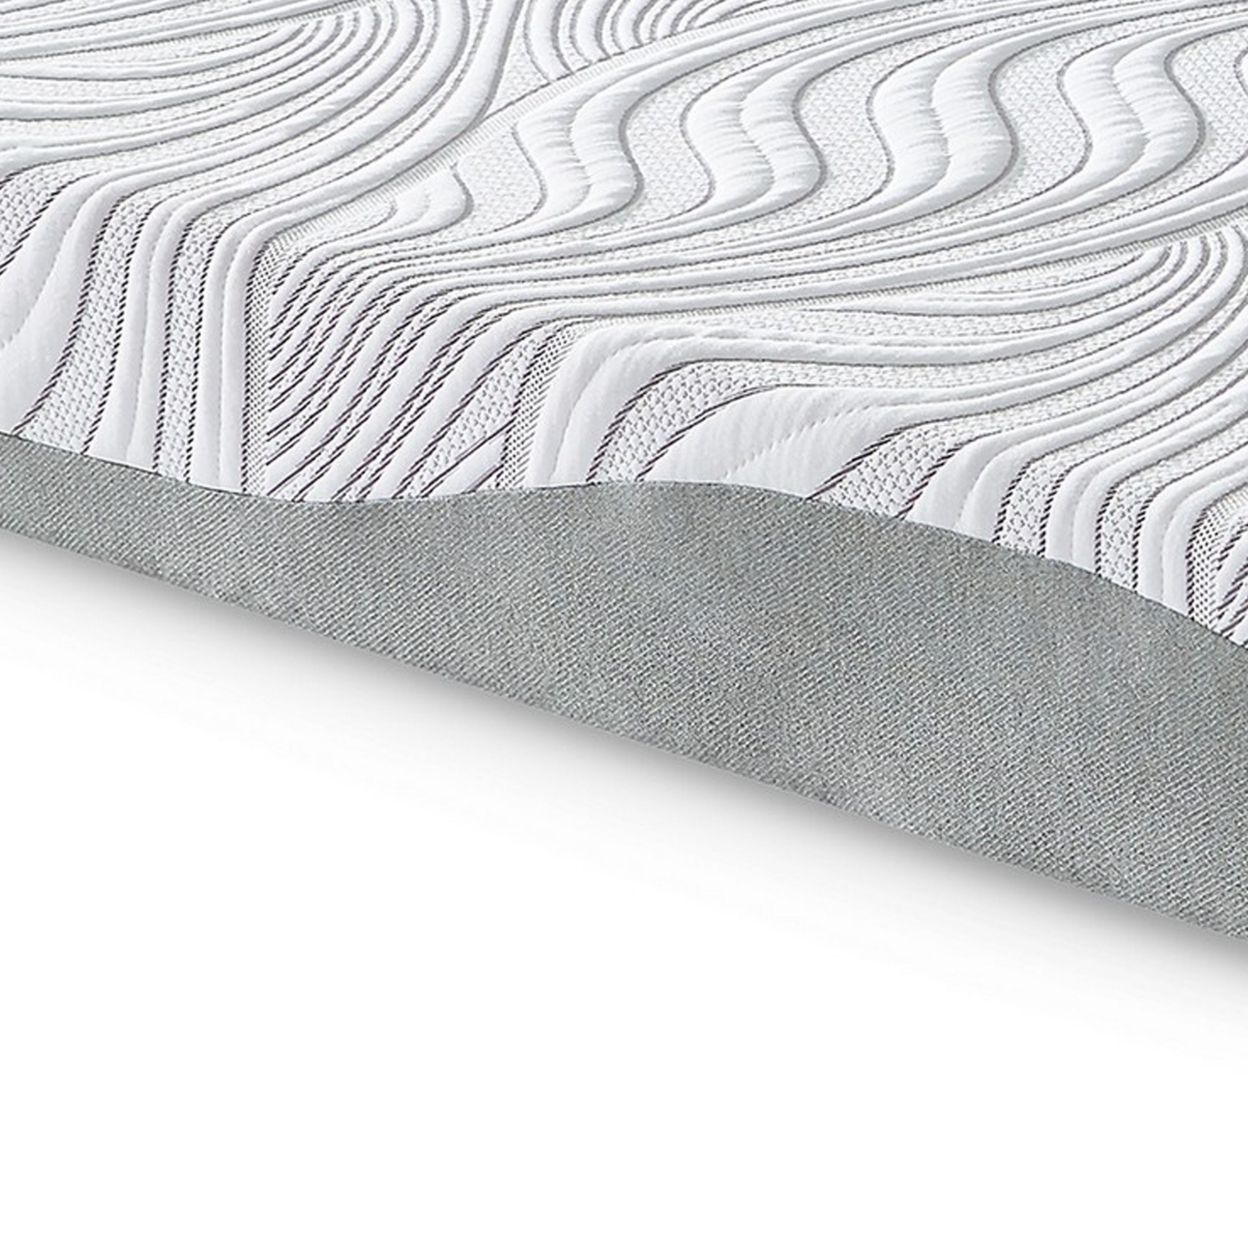 8 Inch Memory Foam Queen Mattress, White And Gray, Stretch Knit Cover